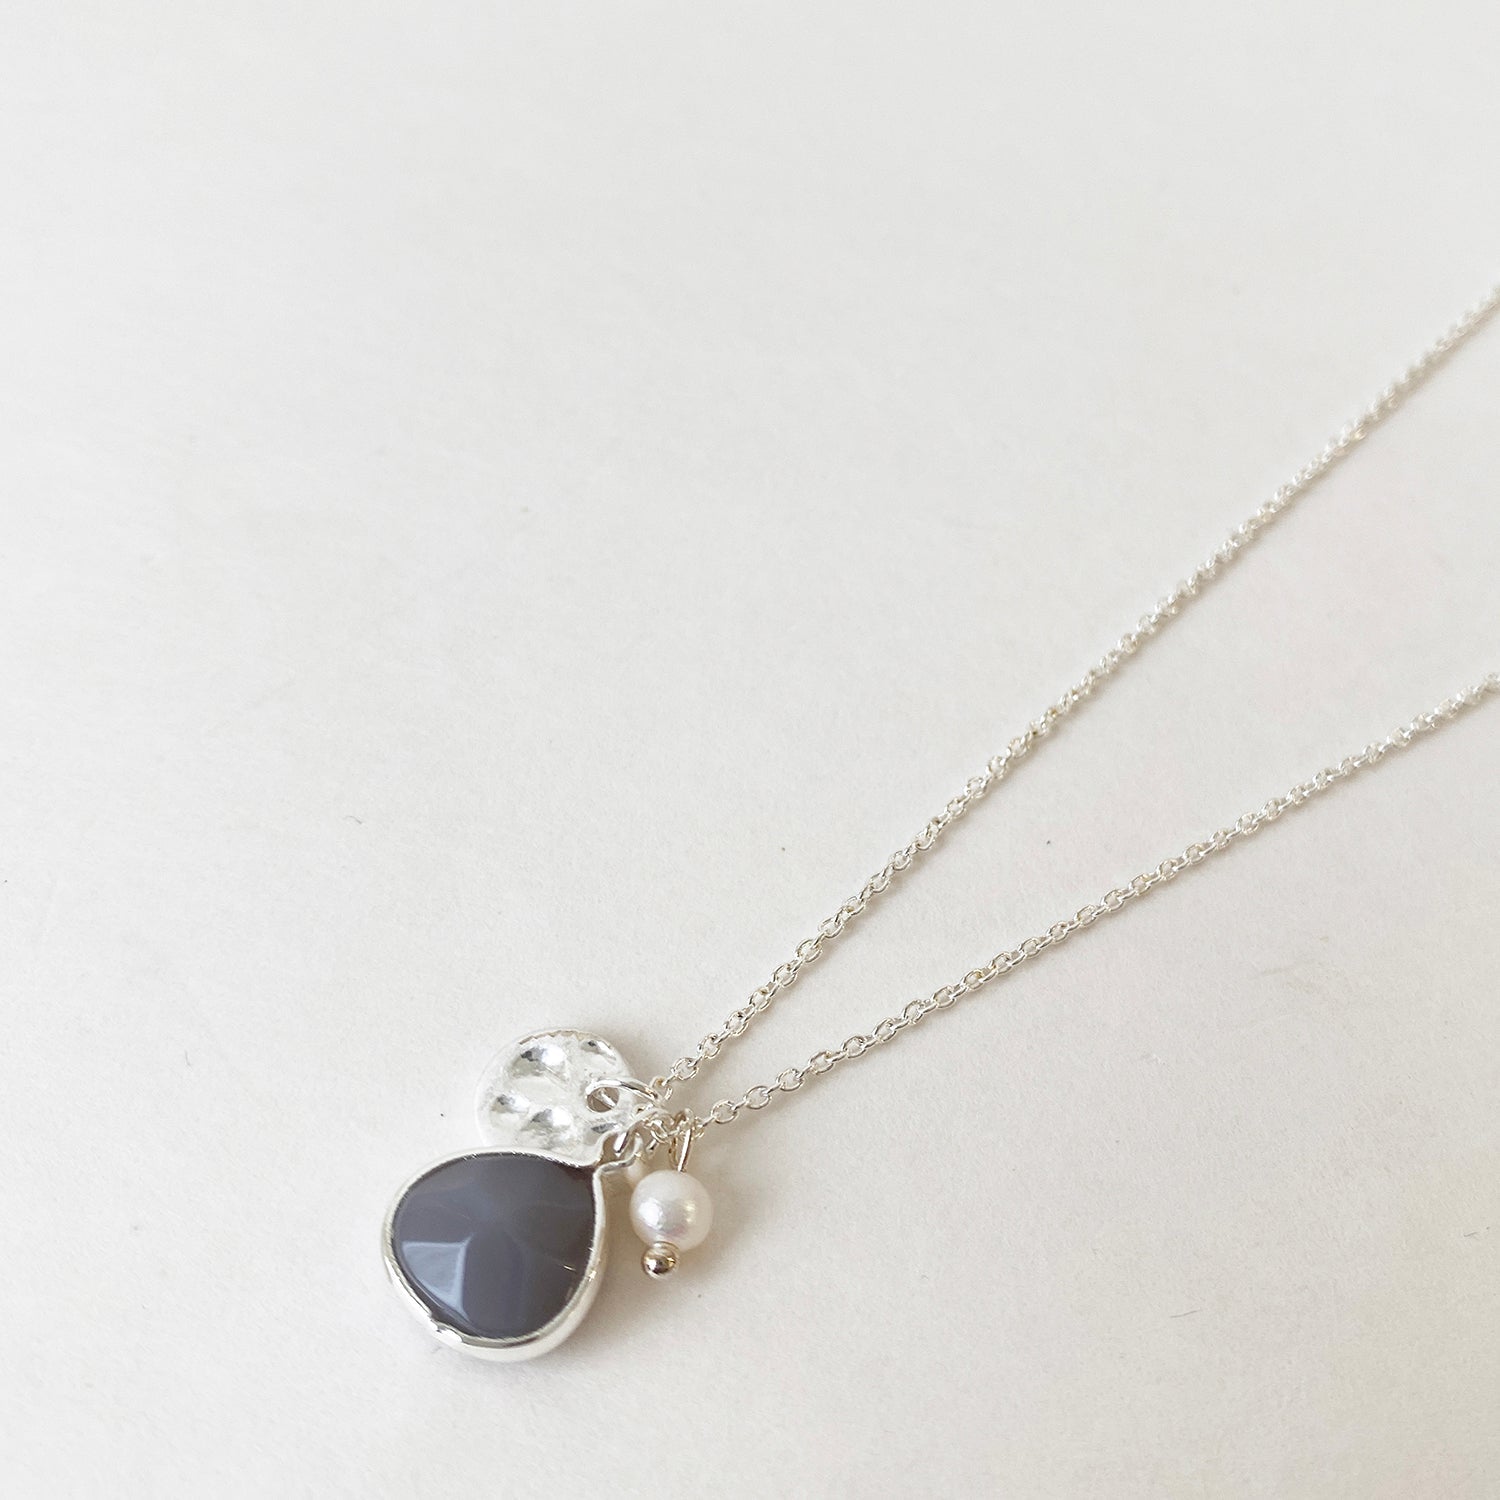 Grey & Silver Chain Necklace